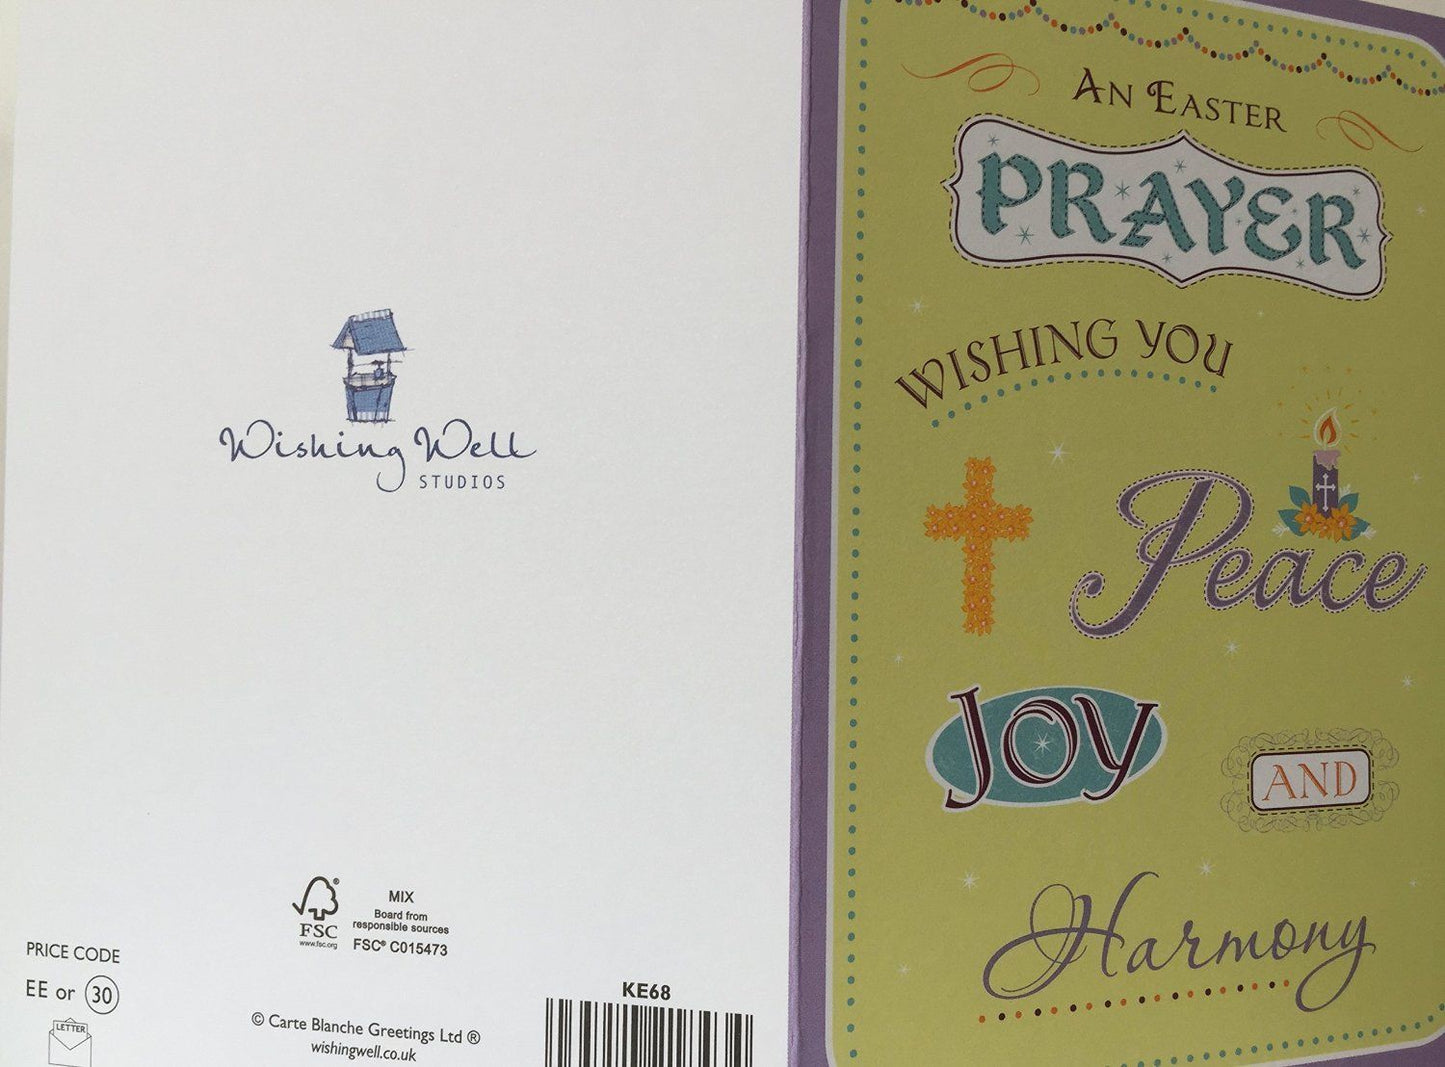 An Easter Prayer Wishing you Peace Joy And Harmony Easter Card